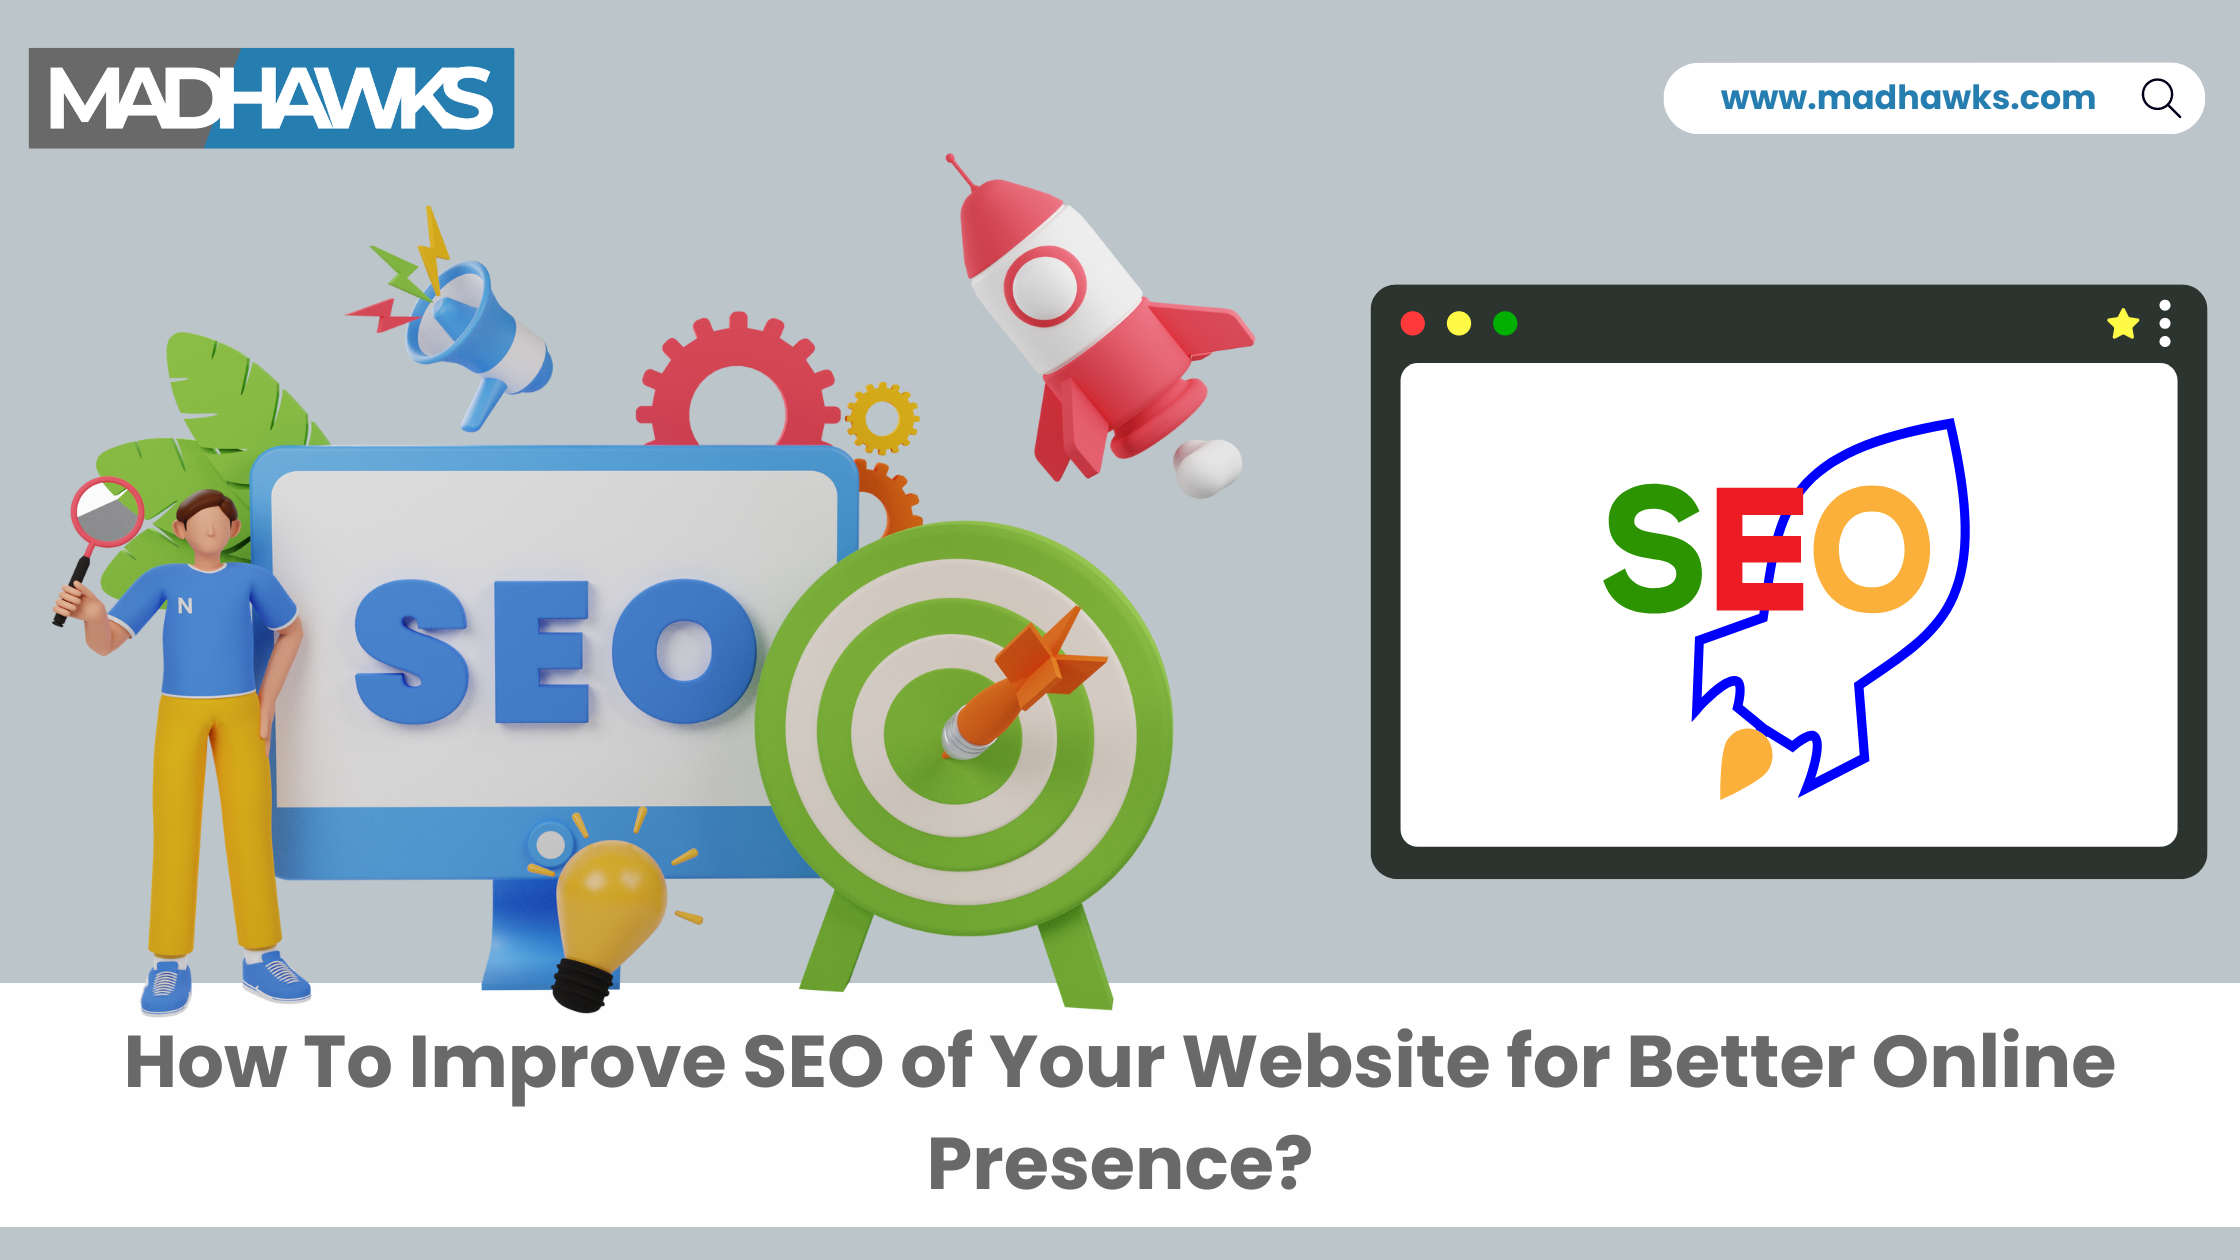 How To Improve SEO of Your Website for Better Online Presence?